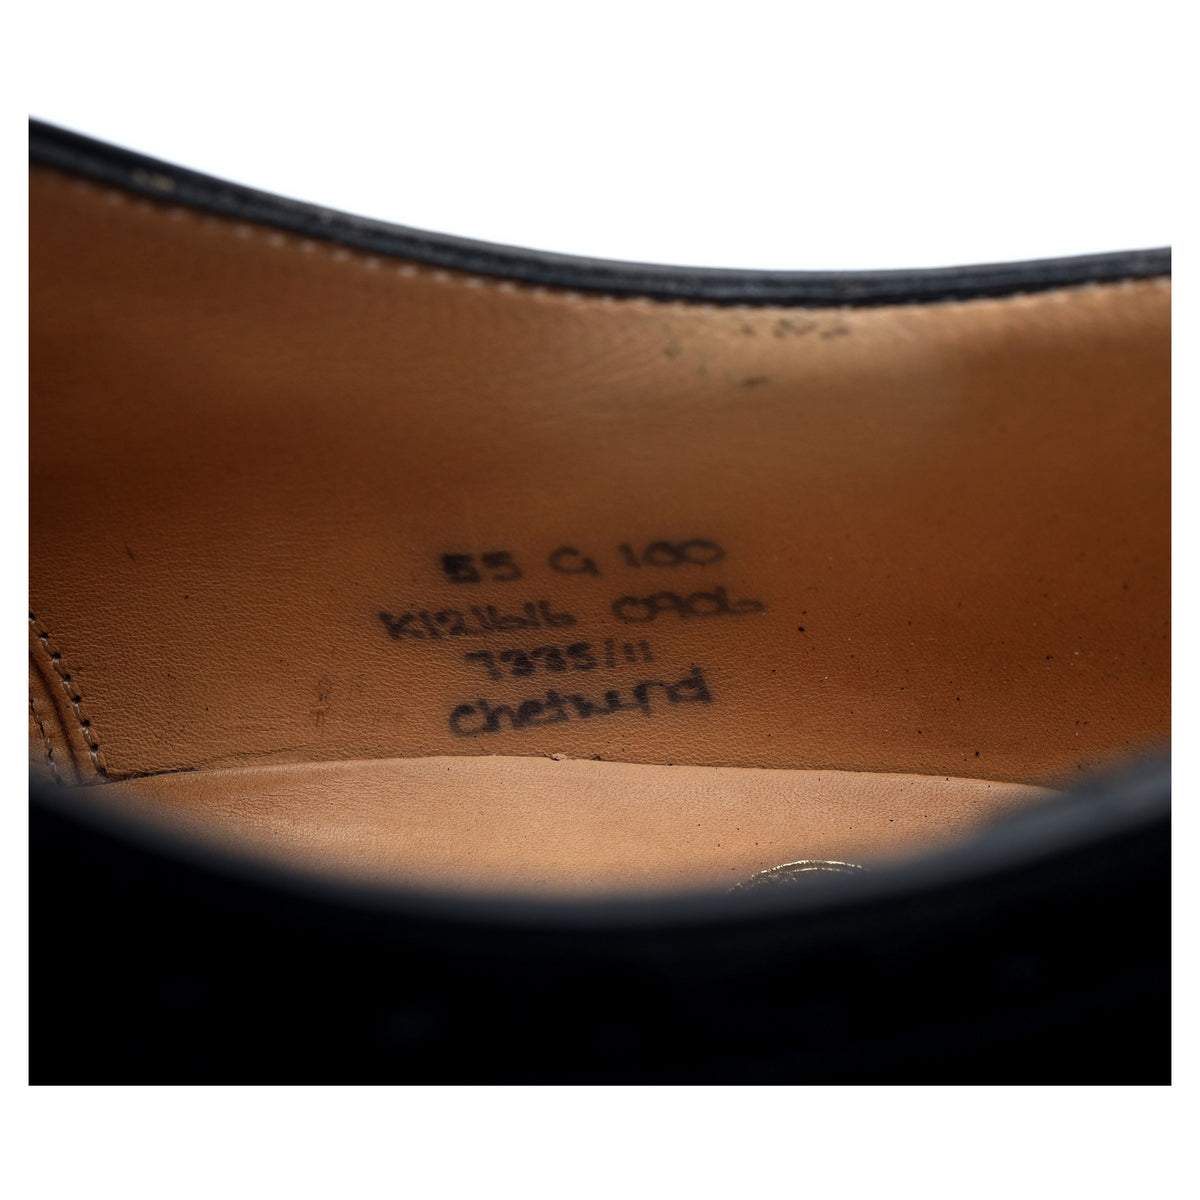 &#39;Chetwynd&#39; Black Leather Brogues UK 5.5 G